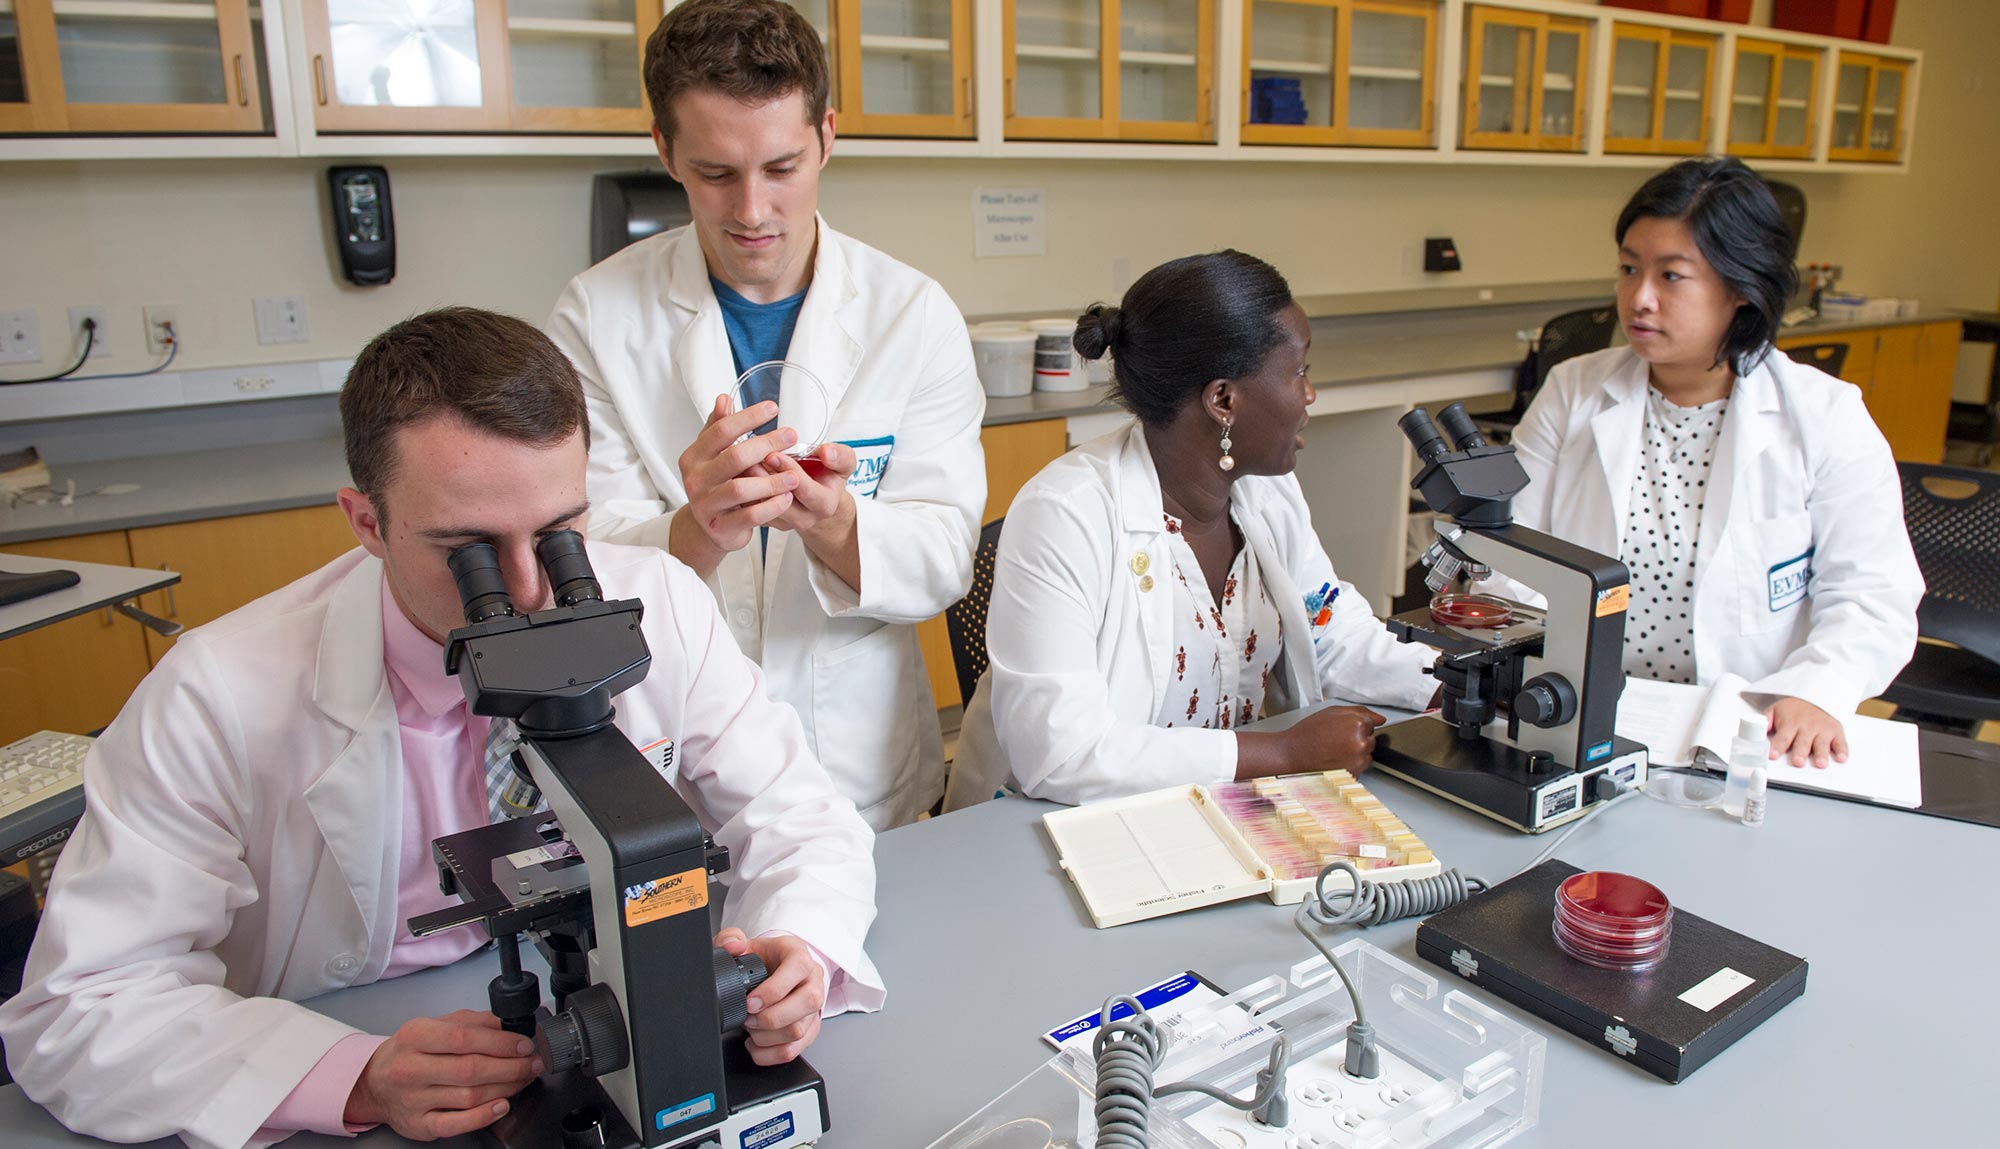 MD students work together in a lab.